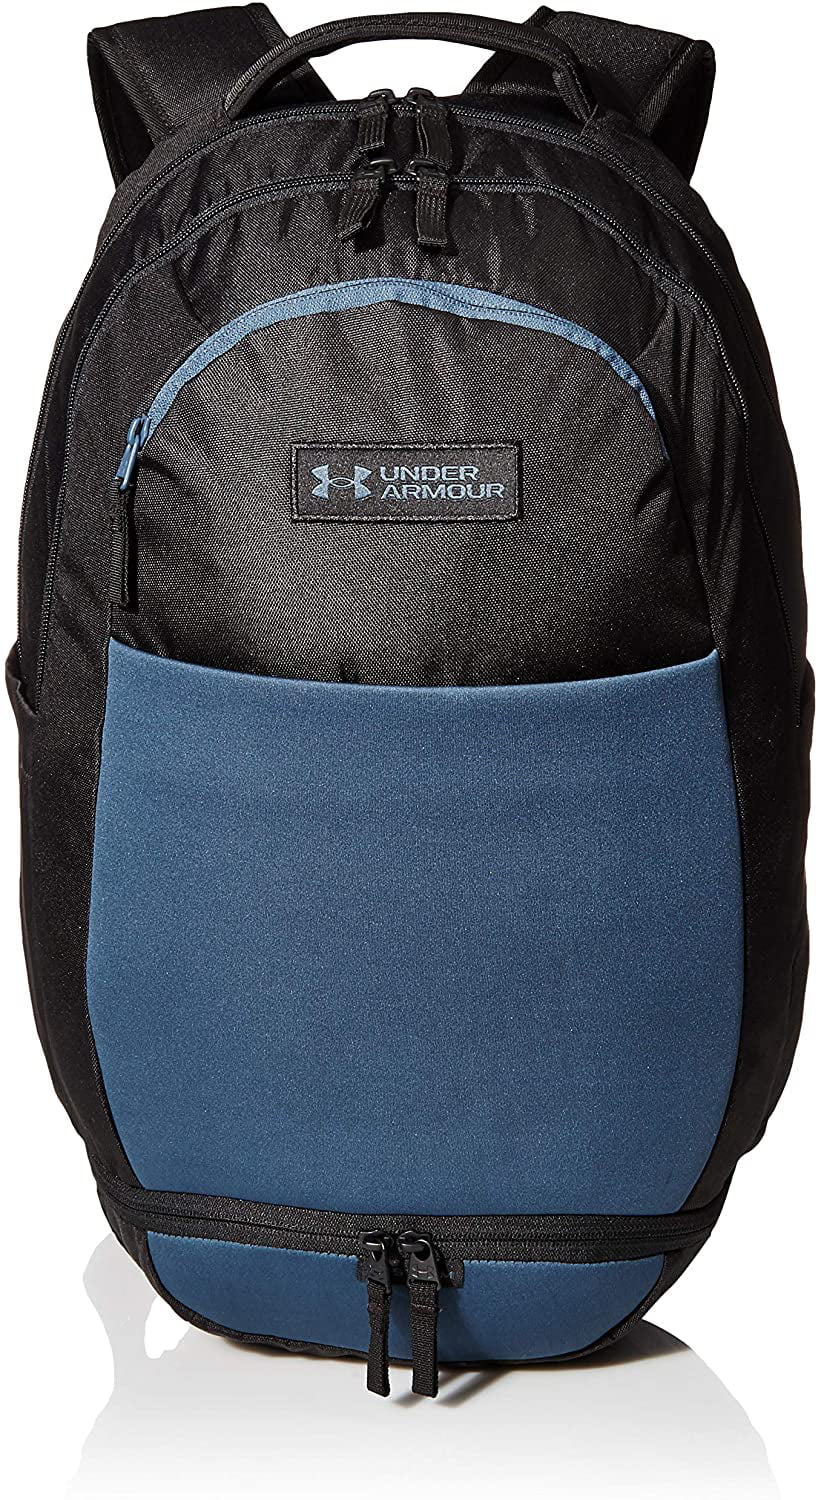 2019 New Under Armour Waterproof nylon backpack students pack travel bag 